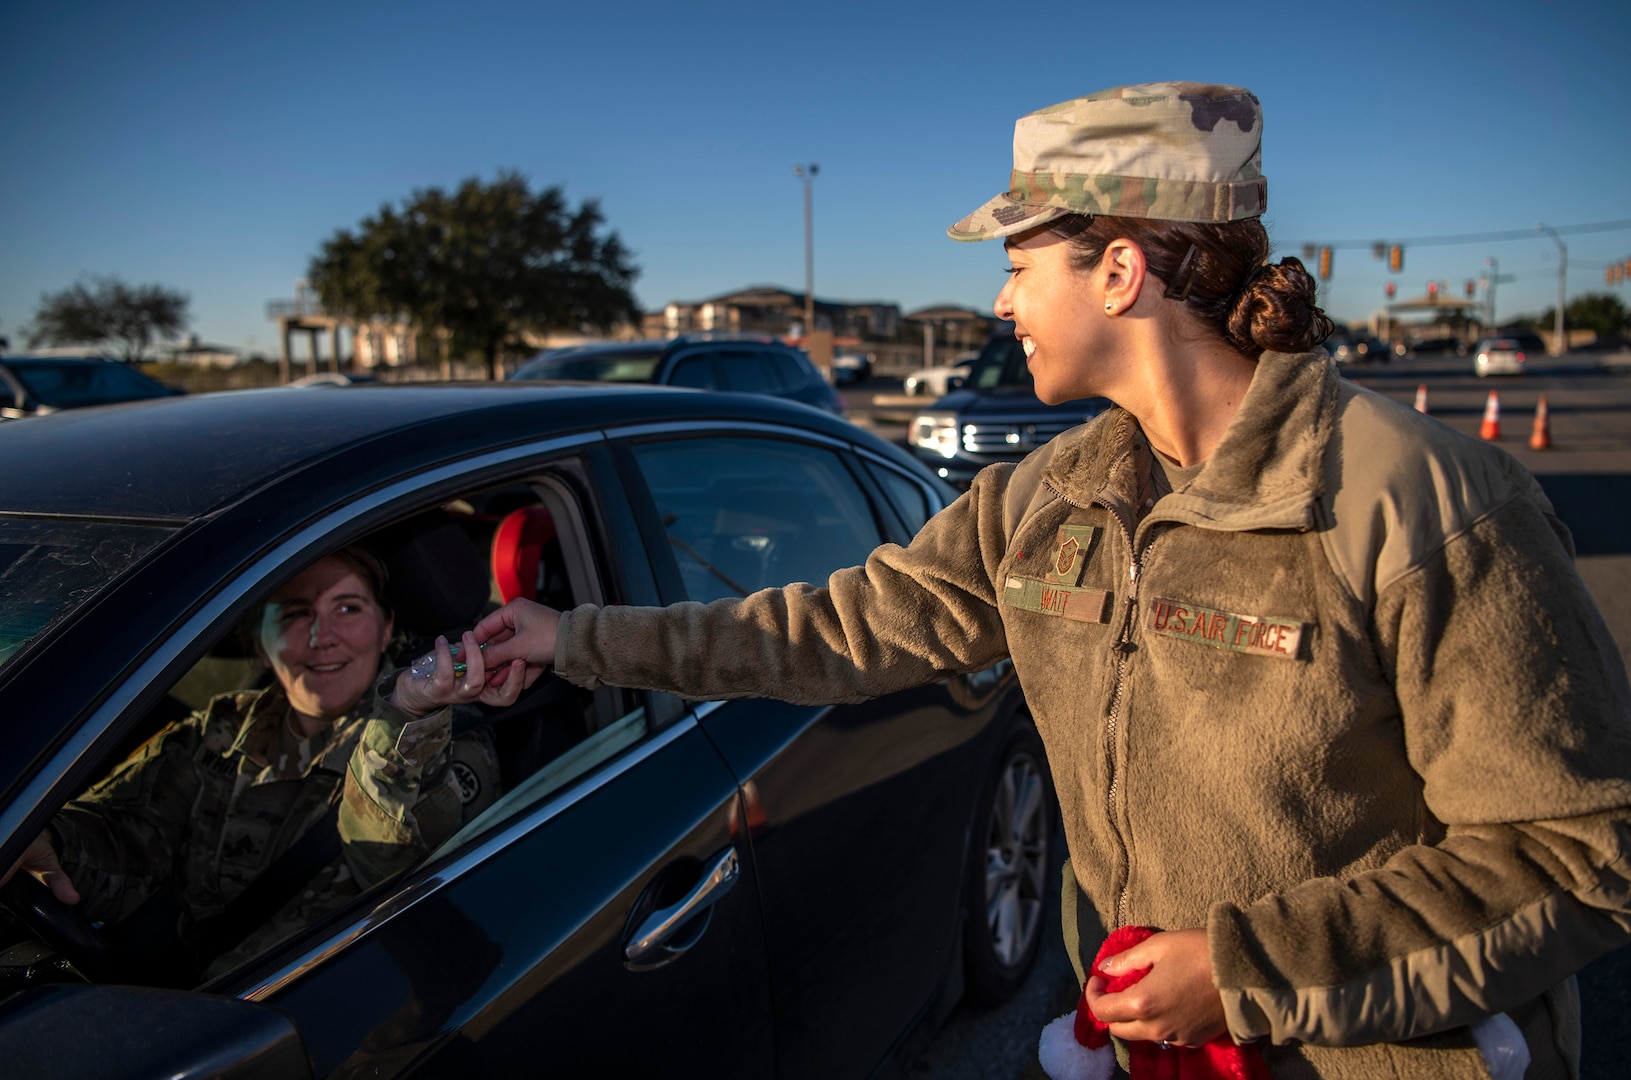 Master Sgt. Keyla Watt, Inter-American Air Forces Academy first sergeant, hands out a candy cane during the morning inbound commute in support of the 37th Training Wing new initiative, “We Care,” at Joint Base San Antonio-Lackland, Texas, Dec. 18, 2019. The initiative involved 37th Training Wing military and civilian members spending the morning at various gates letting each person know that they stand together in support of those struggling with depression and thoughts of suicide by holding a positive message of support and handing out over 400 candy canes. If you are struggling with thoughts of suicide, please go directly to the Mental Health Clinic or to your closest Emergency Room. You can also reach the National Suicide Prevention Lifeline at 1-800-273-8255.